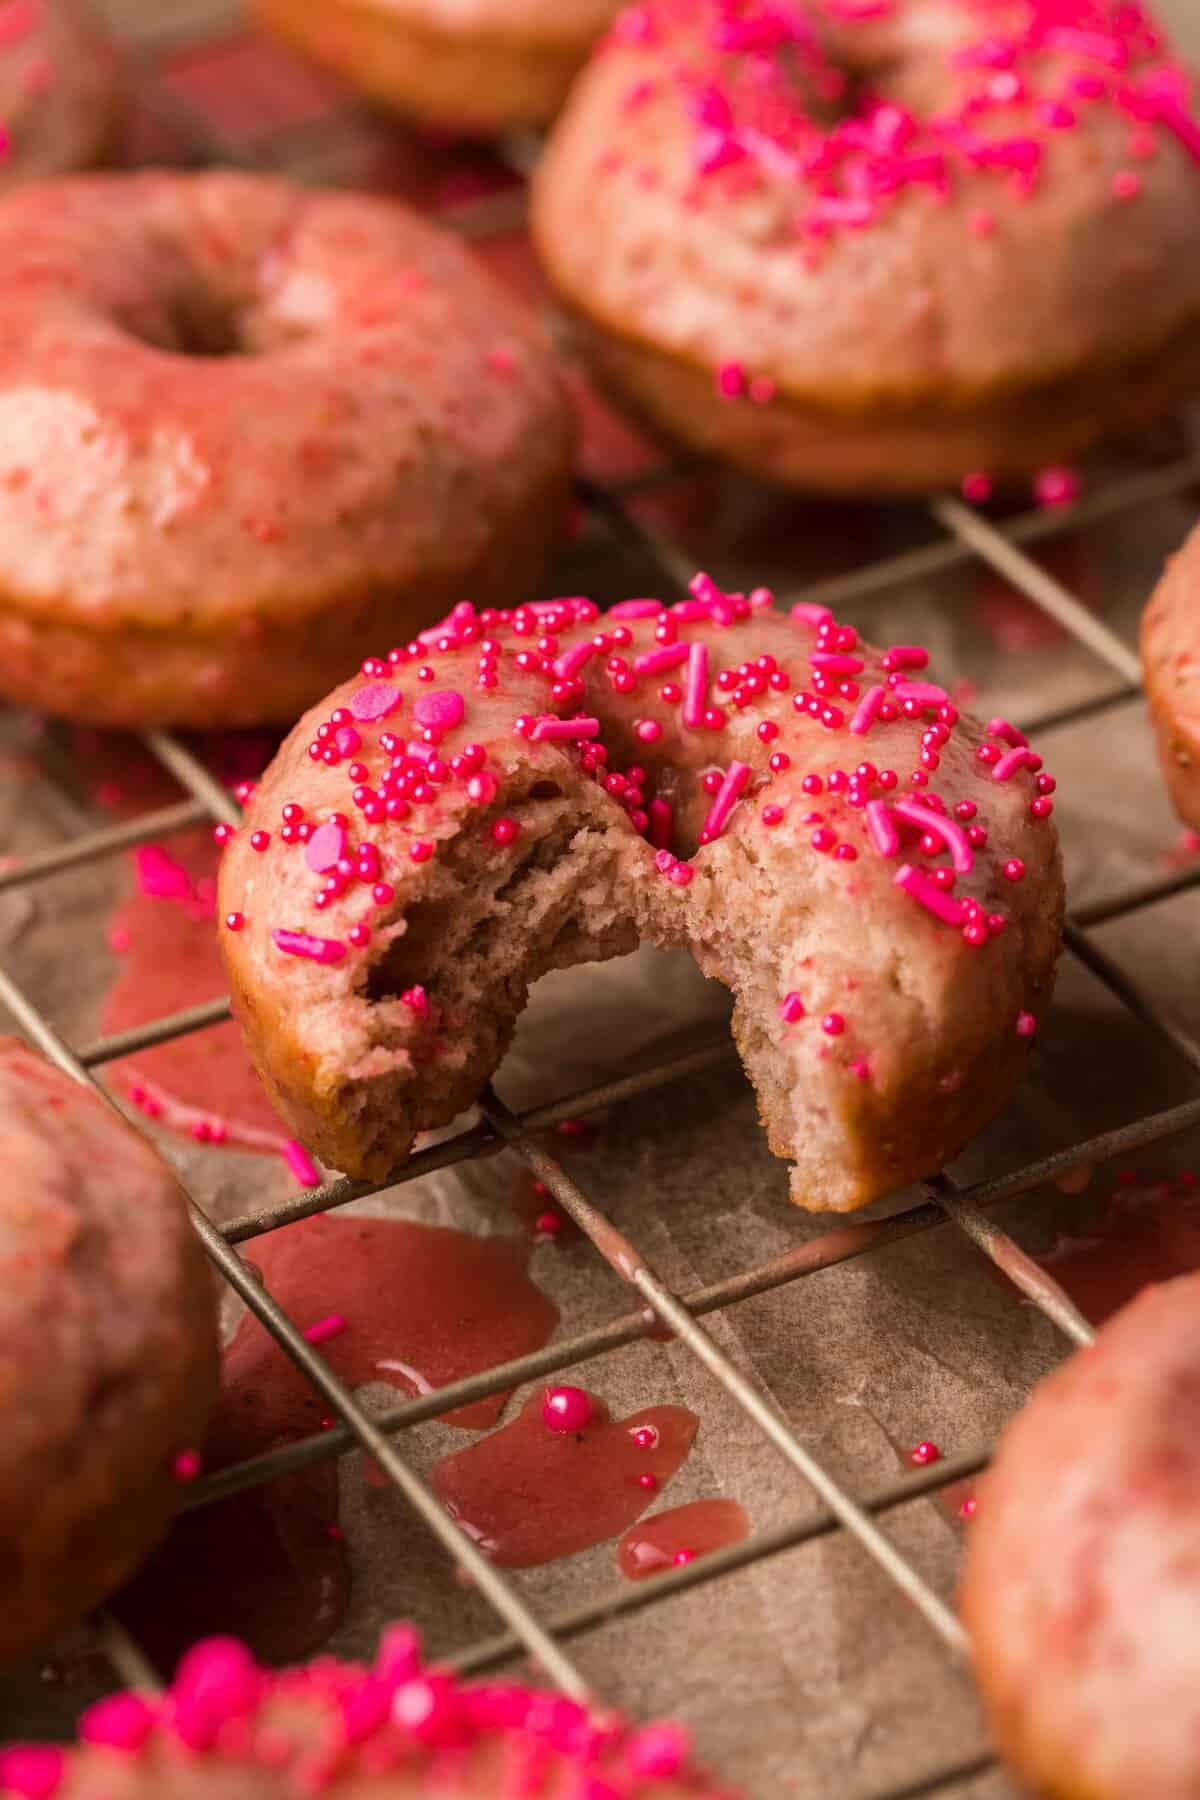 Glazed strawberry donut with sprinkles and bite taken out of donut.